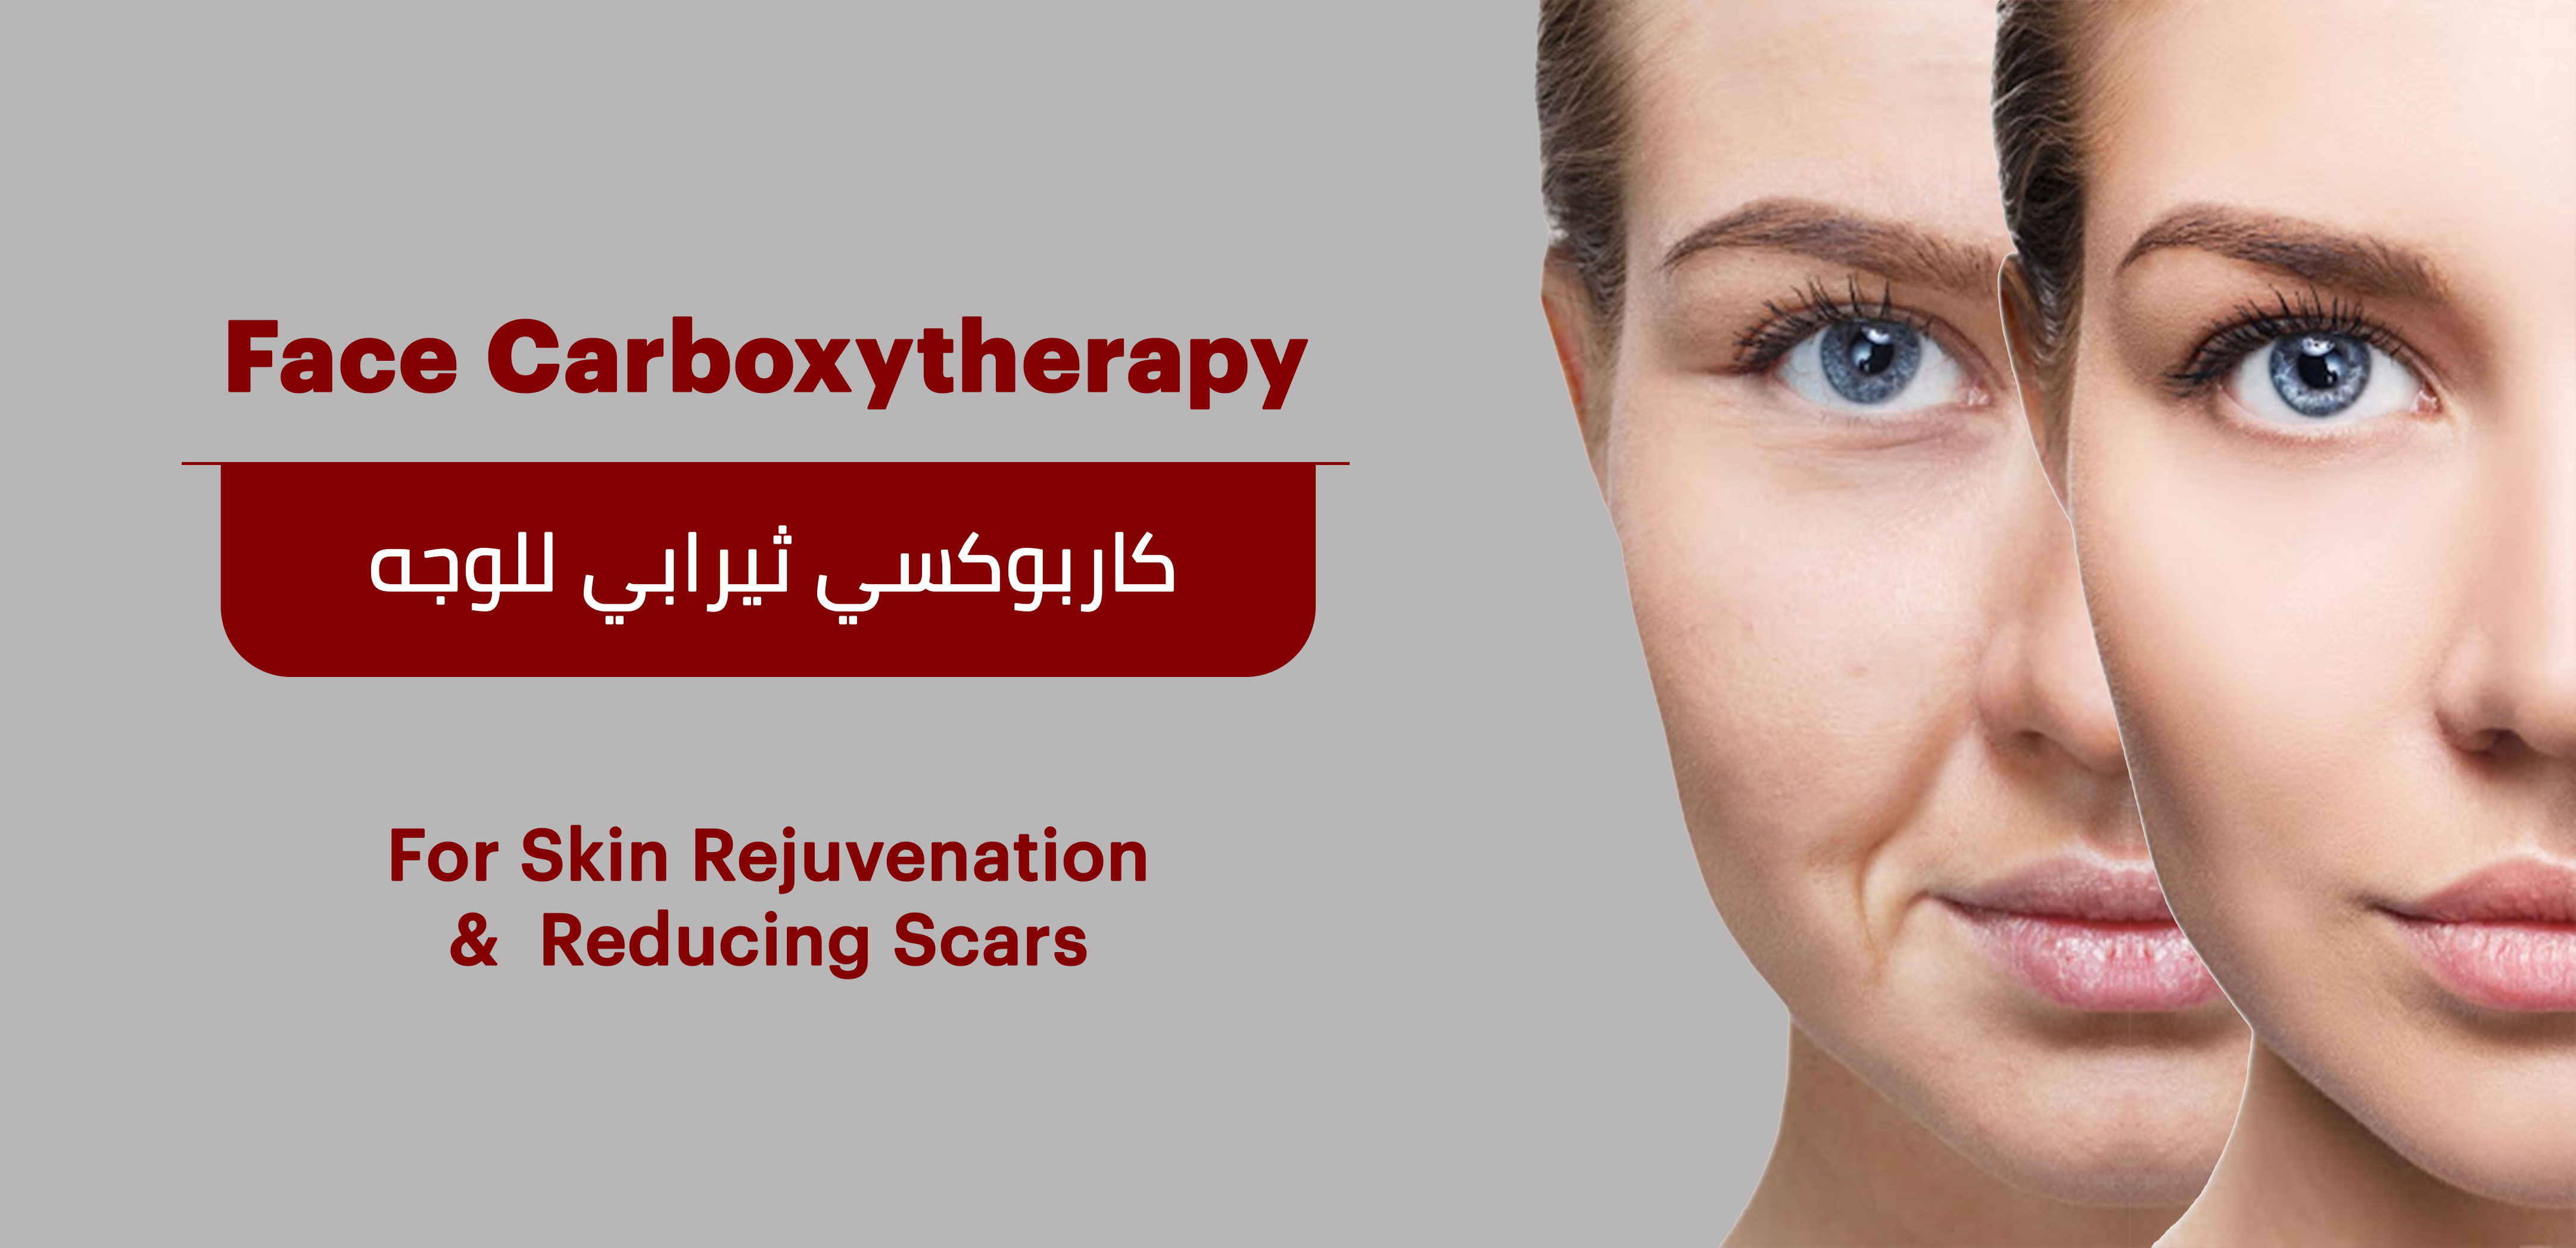 FACE CARBOXYTHERAPY 